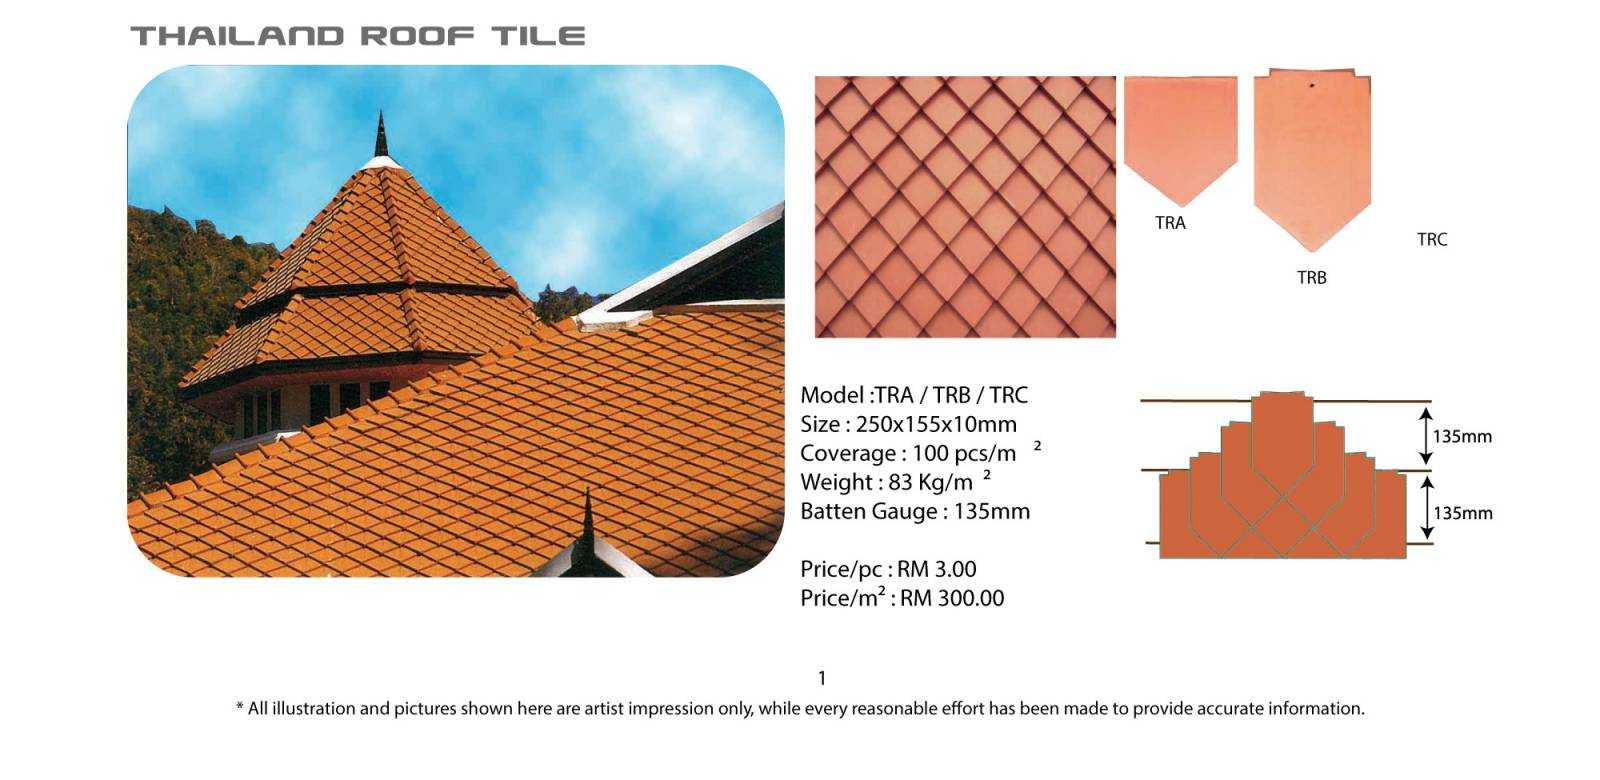 Thailand Roof Tile